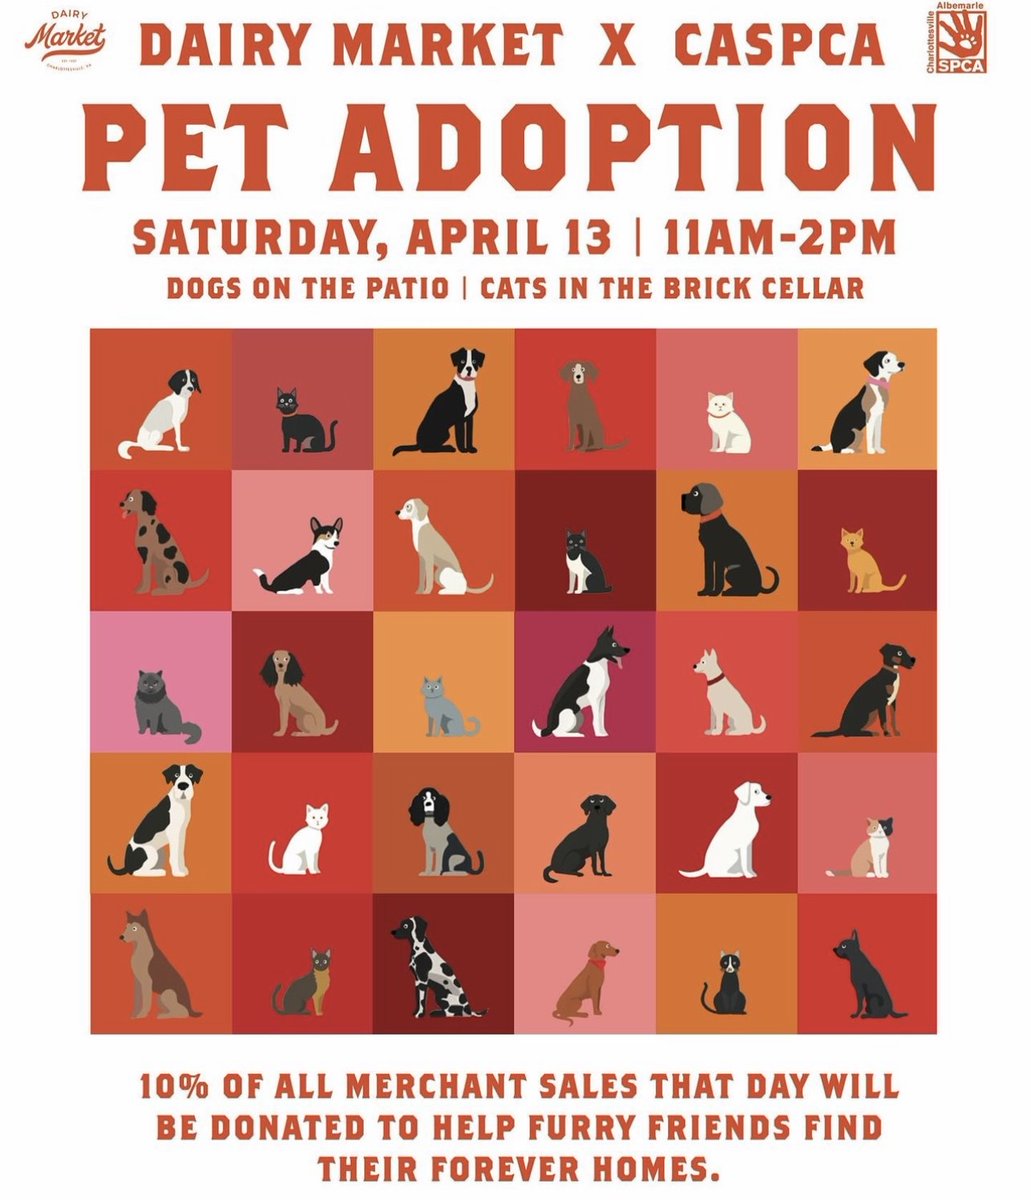 Wow... we LOVE this!🐶CASPCA and @dairymarketcville are holding their Inaugural Spring Pet Adoption event on Saturday, April 13th from 11AM until 2PM! facebook.com/events/1129354… #cvillepetadoption #charlottesville #charlottesvilleva #cvilledogs #cvillepuppies #cvillespca #caspca